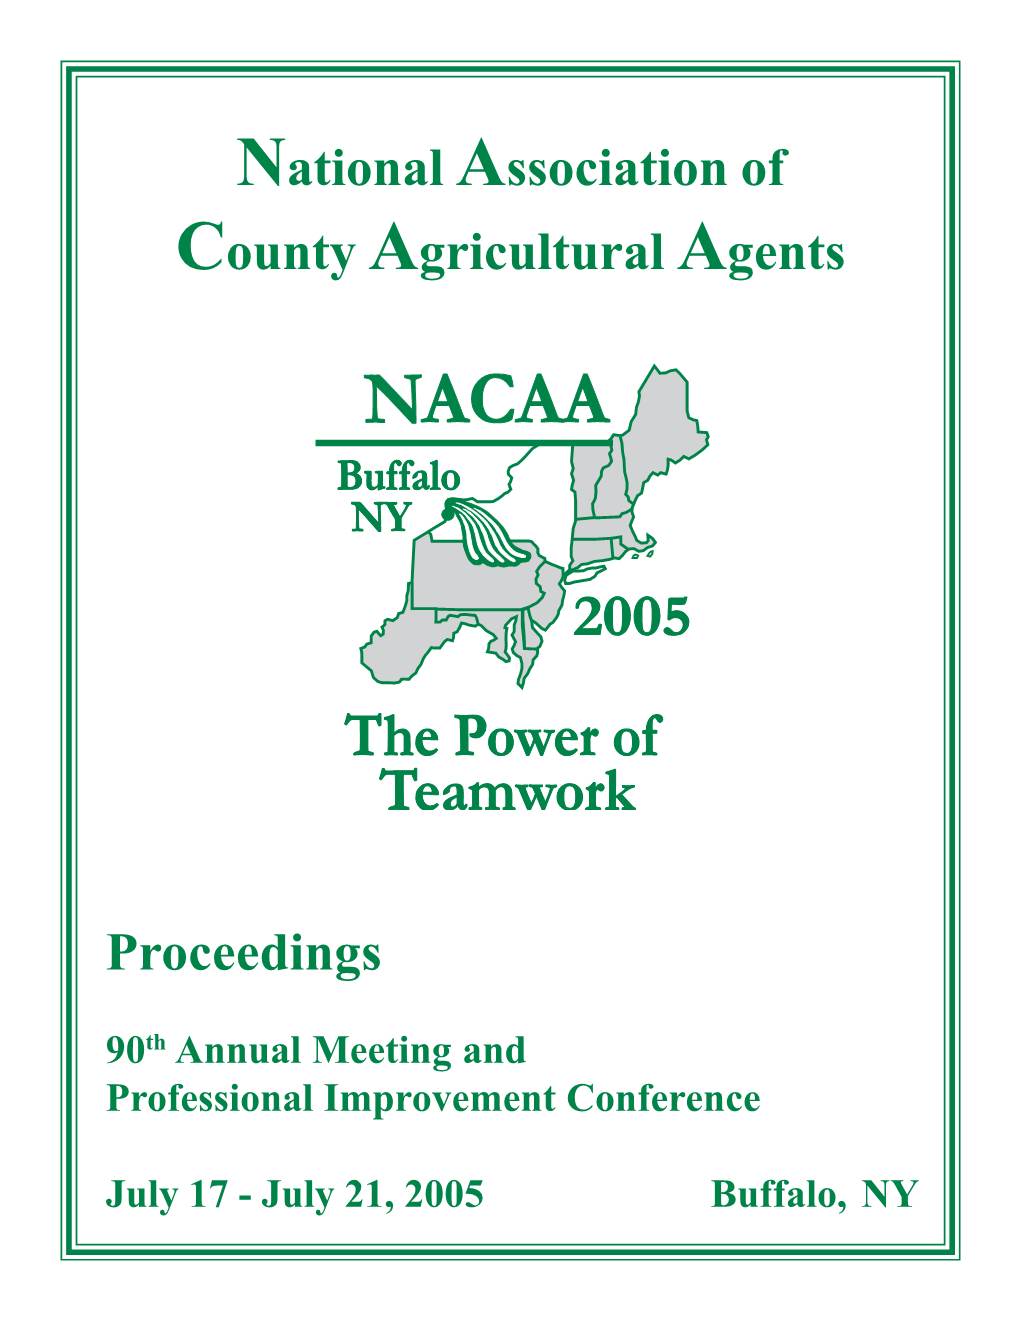 National Association of County Agricultural Agents Proceedings